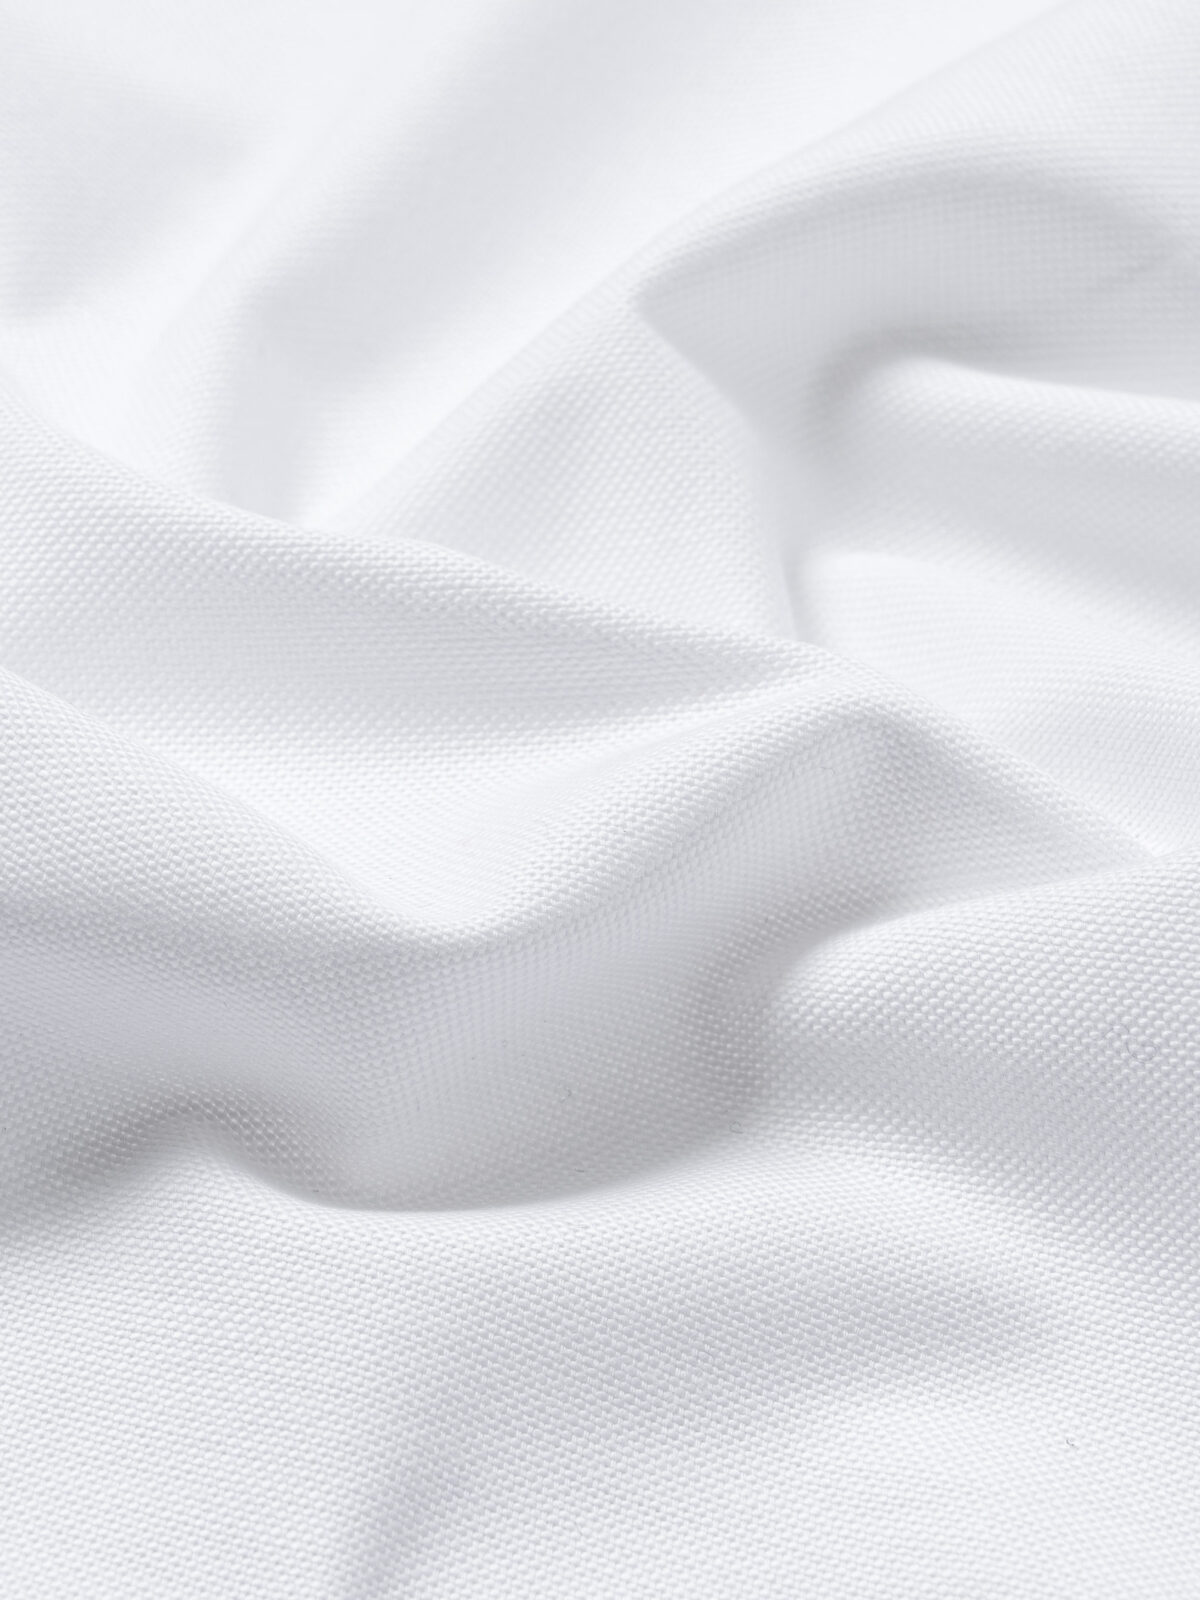 Washed White Lightweight Oxford Shirts by Proper Cloth